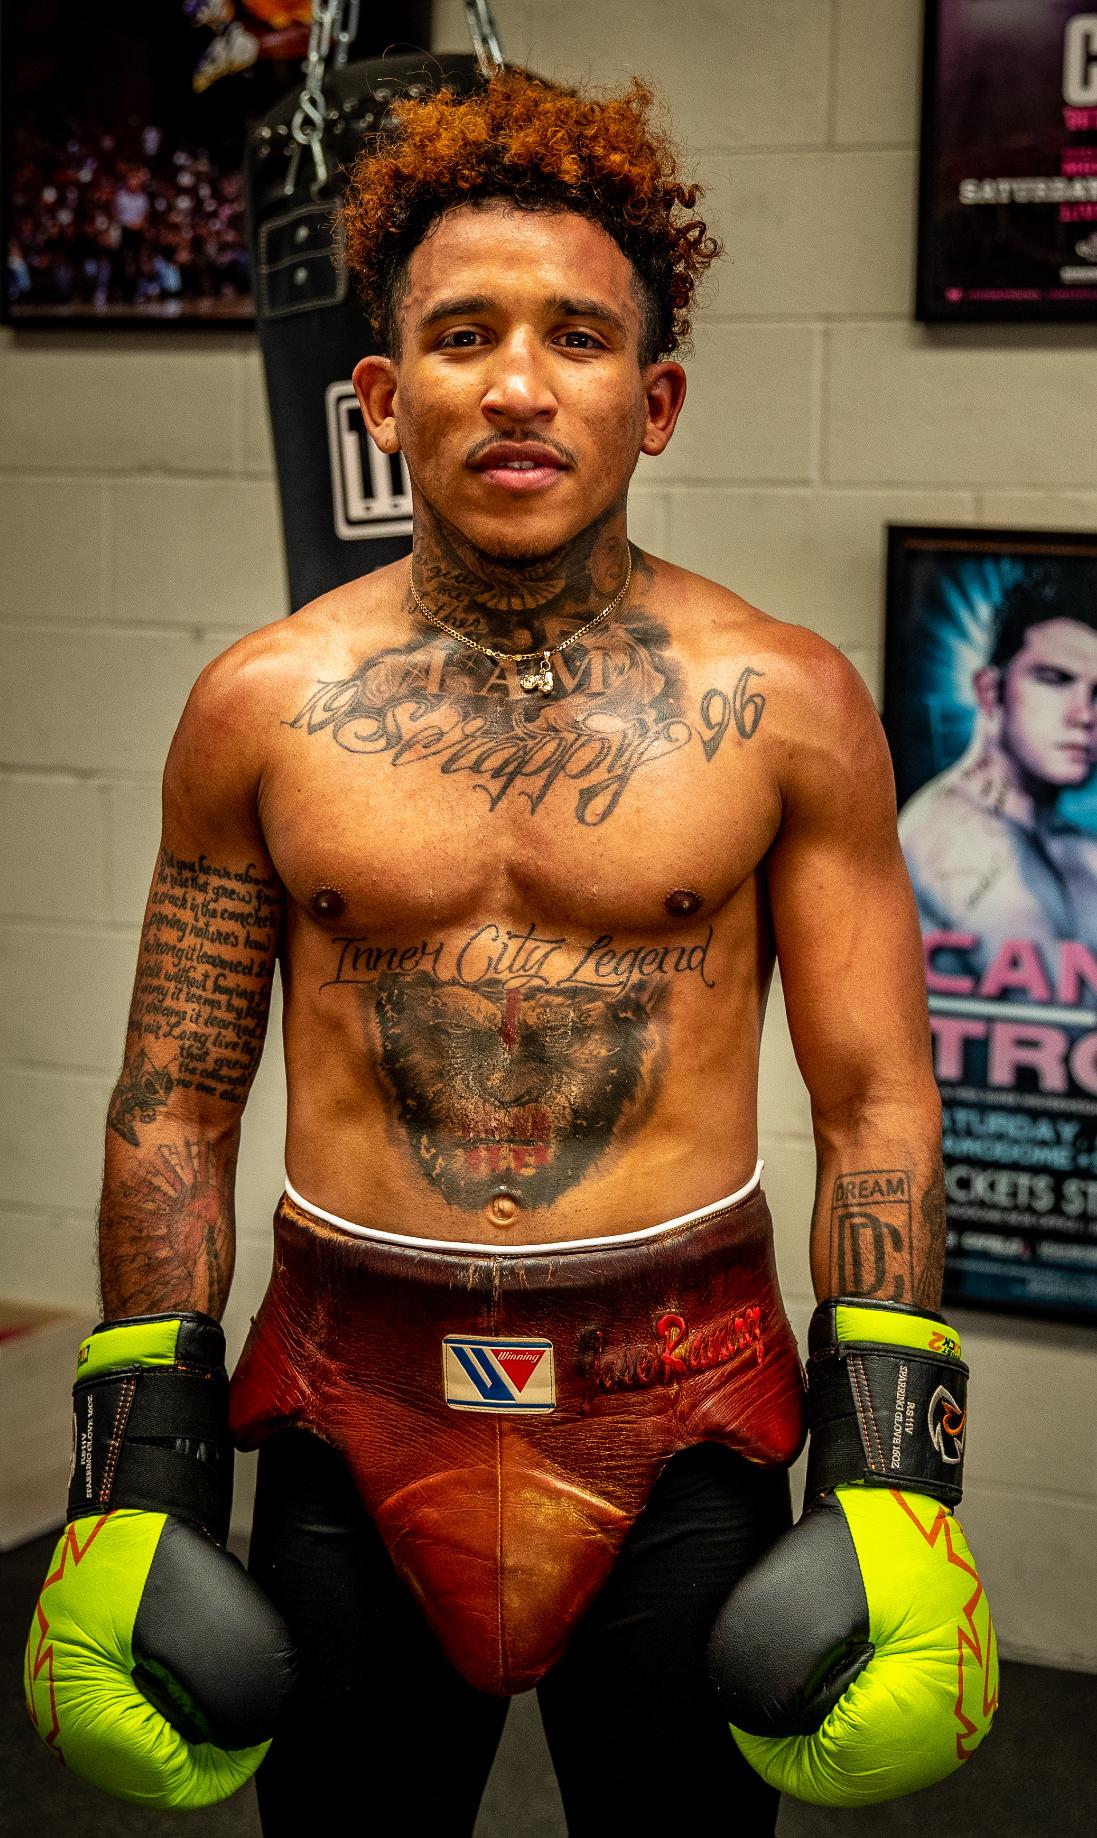 My name is John “Scrappy” Ramirez. I started boxing at the age of 20, when I dropped out of college and had no purpose. I was a troubled youth that played football with hopes and dreams of playing in the NFL. I never thought I would be a boxer, but